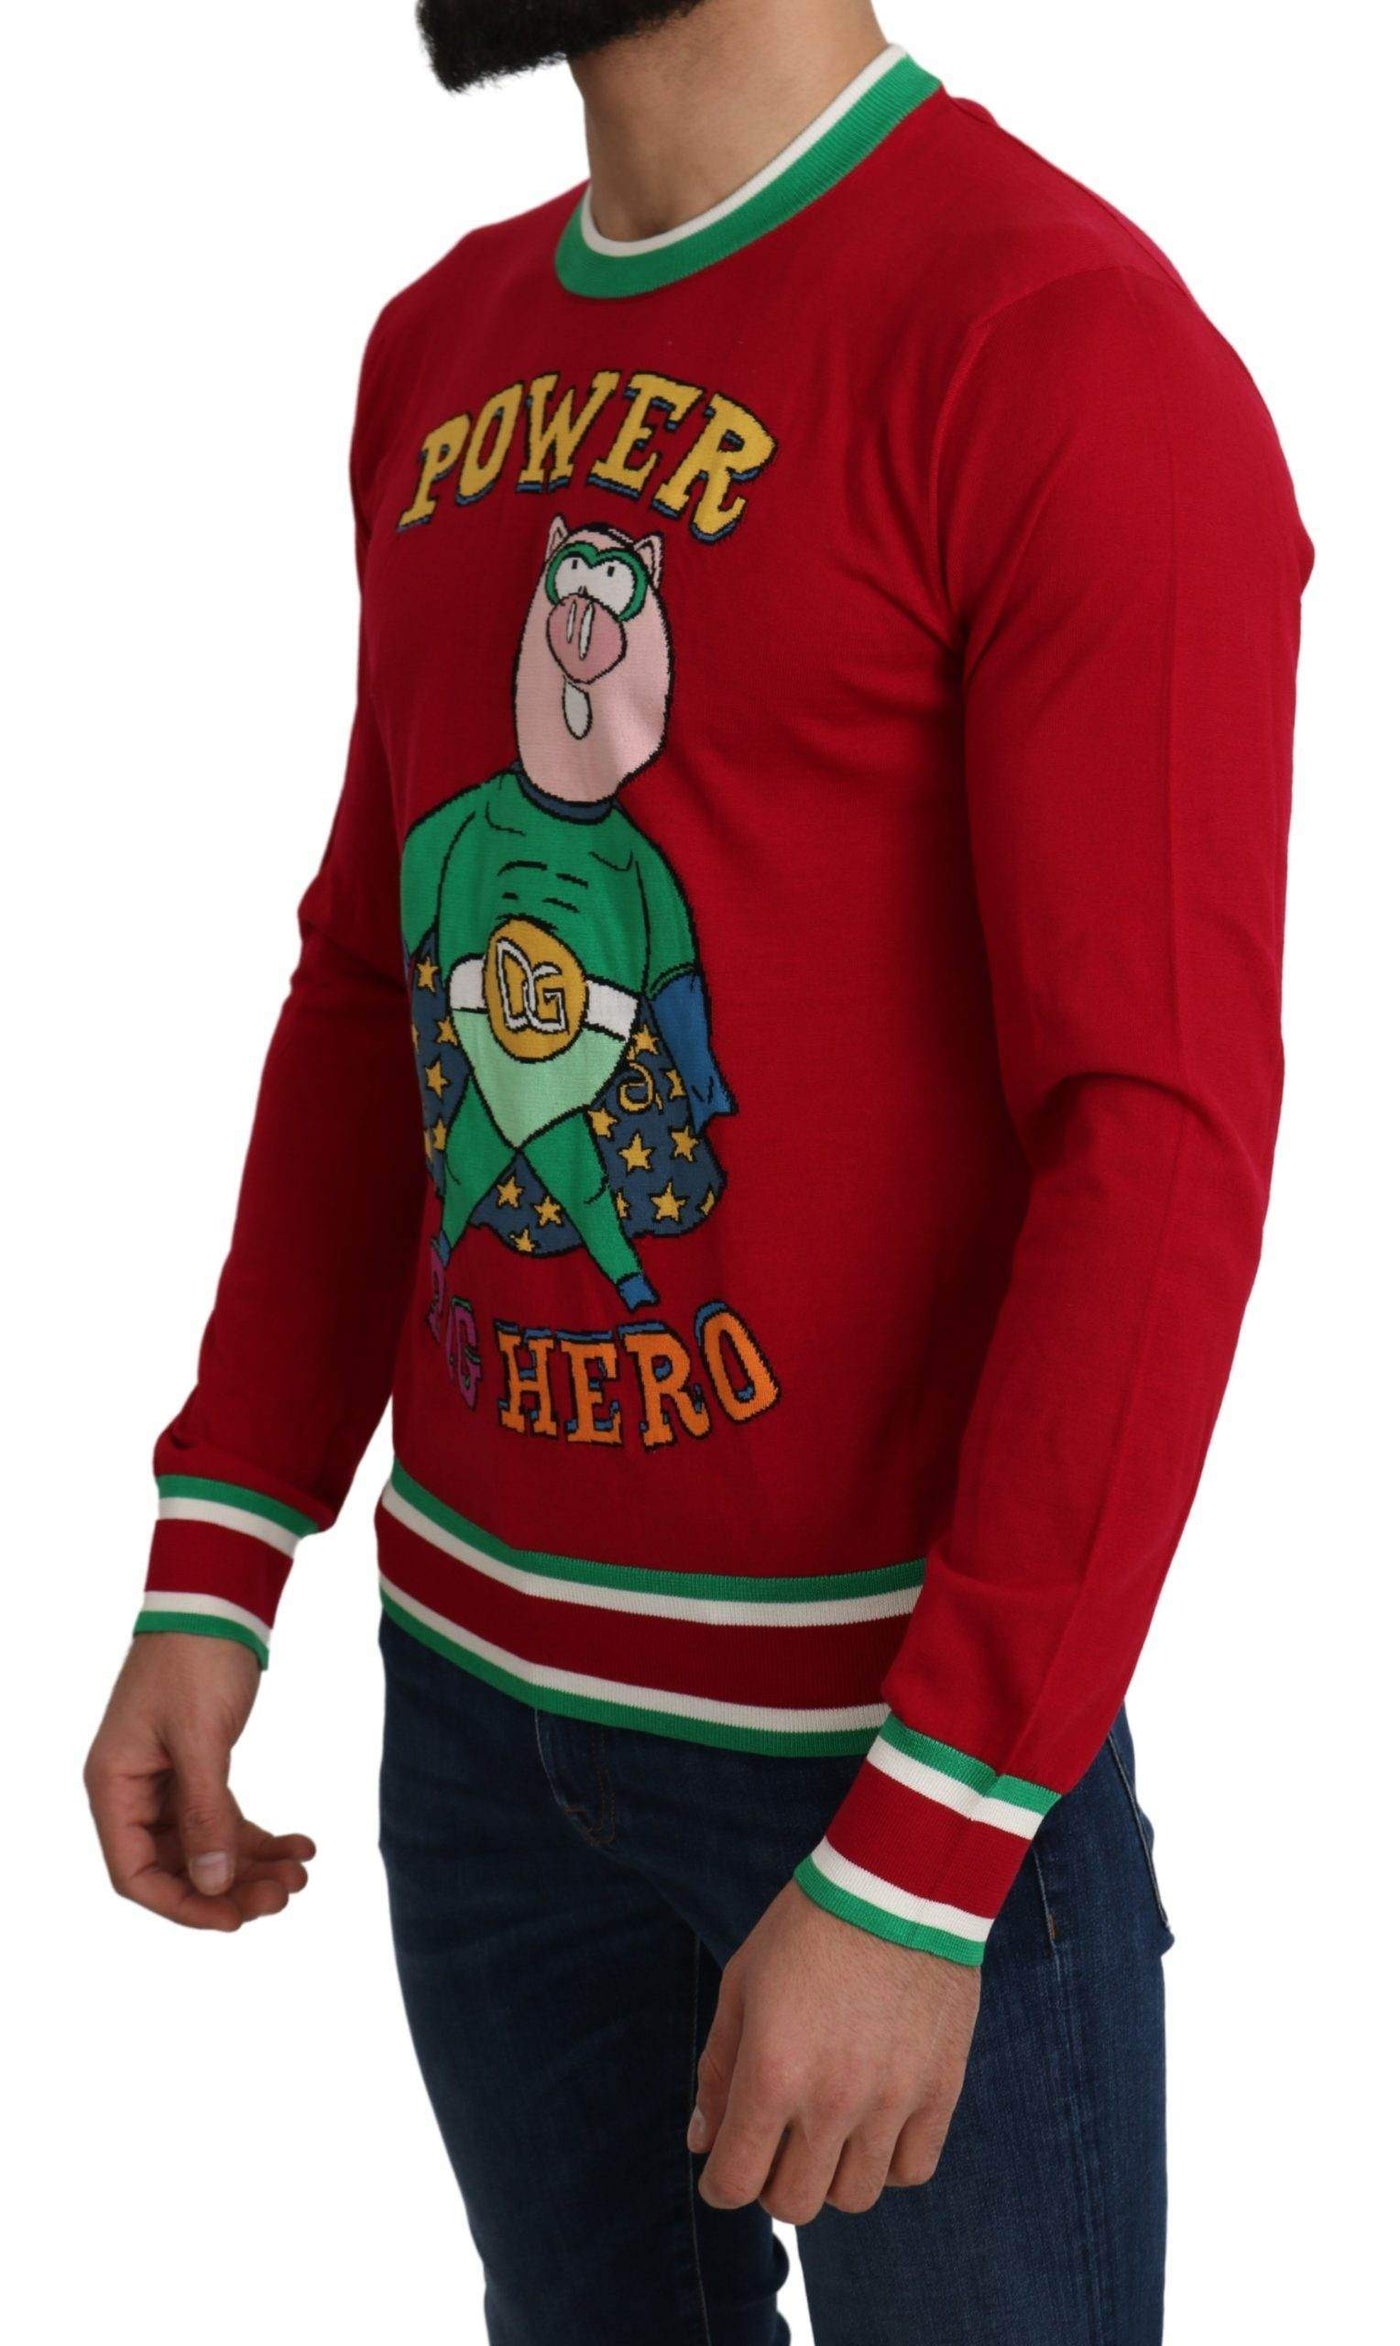 Dolce & Gabbana  Red Wool Silk Pig of the Year Sweater #men, Brand_Dolce & Gabbana, Catch, Dolce & Gabbana, feed-agegroup-adult, feed-color-red, feed-gender-male, feed-size-IT46 | S, feed-size-IT48 | M, feed-size-IT50 | L, feed-size-IT52 | XL, Gender_Men, IT46 | S, IT48 | M, IT50 | L, IT52 | XL, Kogan, Men - New Arrivals, Red, Sweaters - Men - Clothing at SEYMAYKA